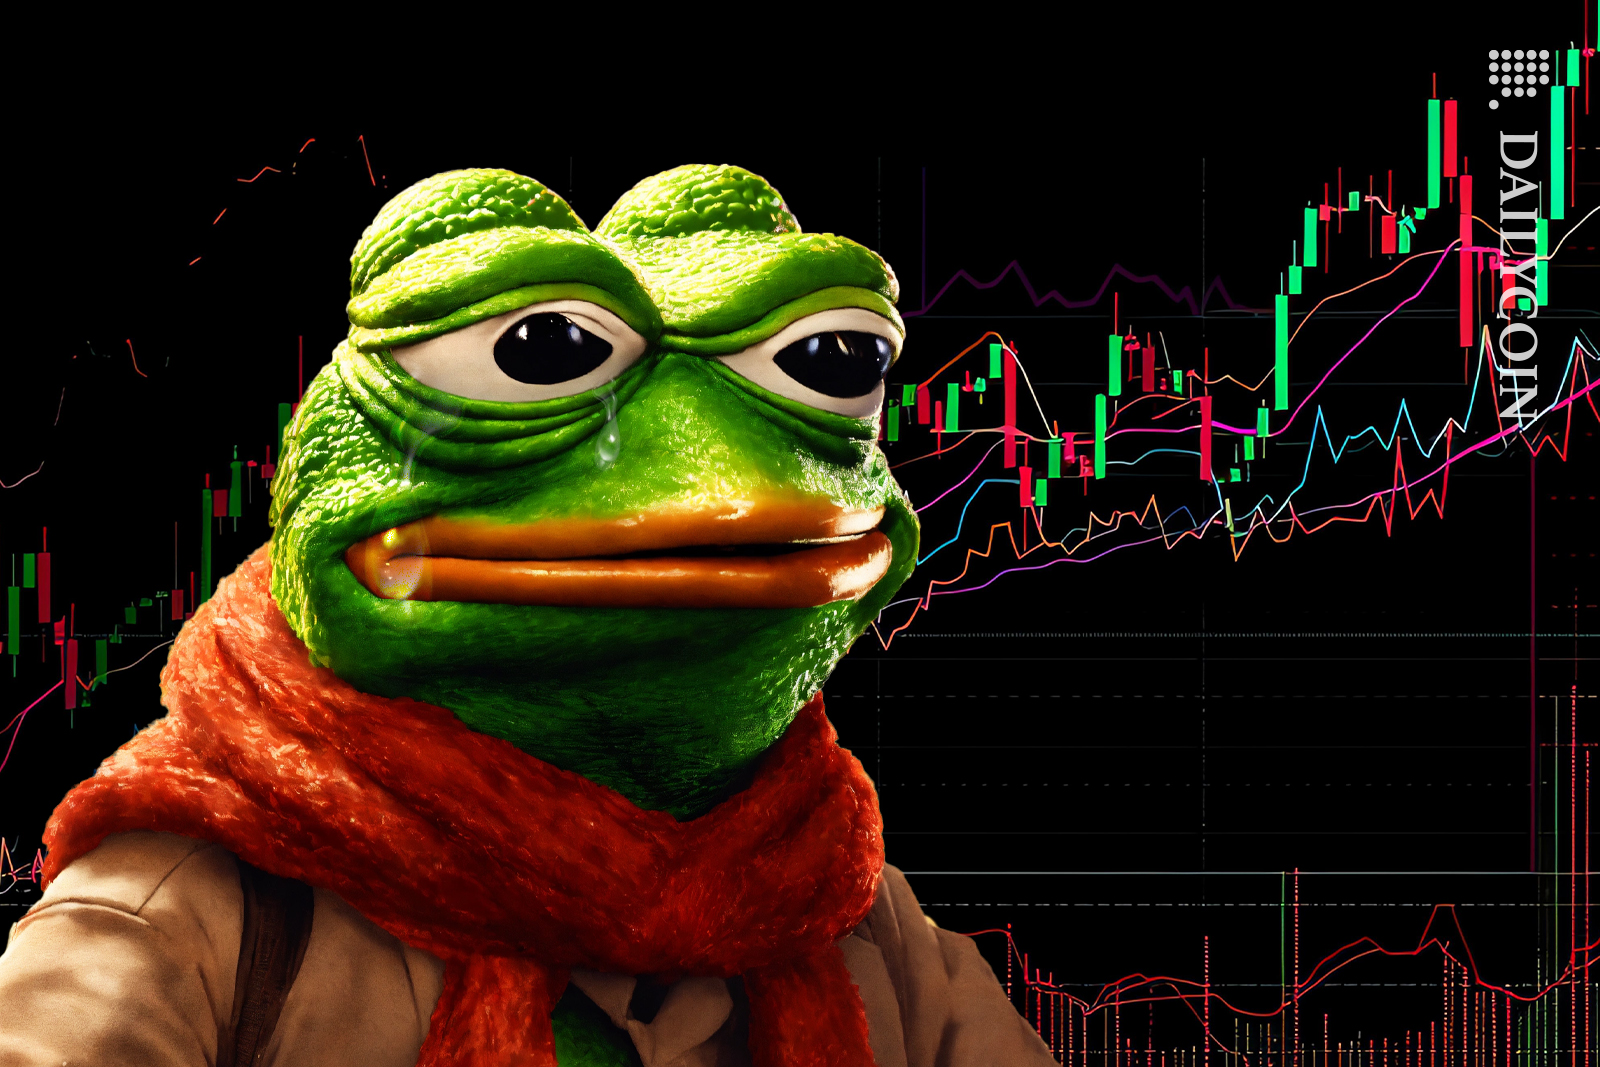 Pepe meme crying over his chart worried.